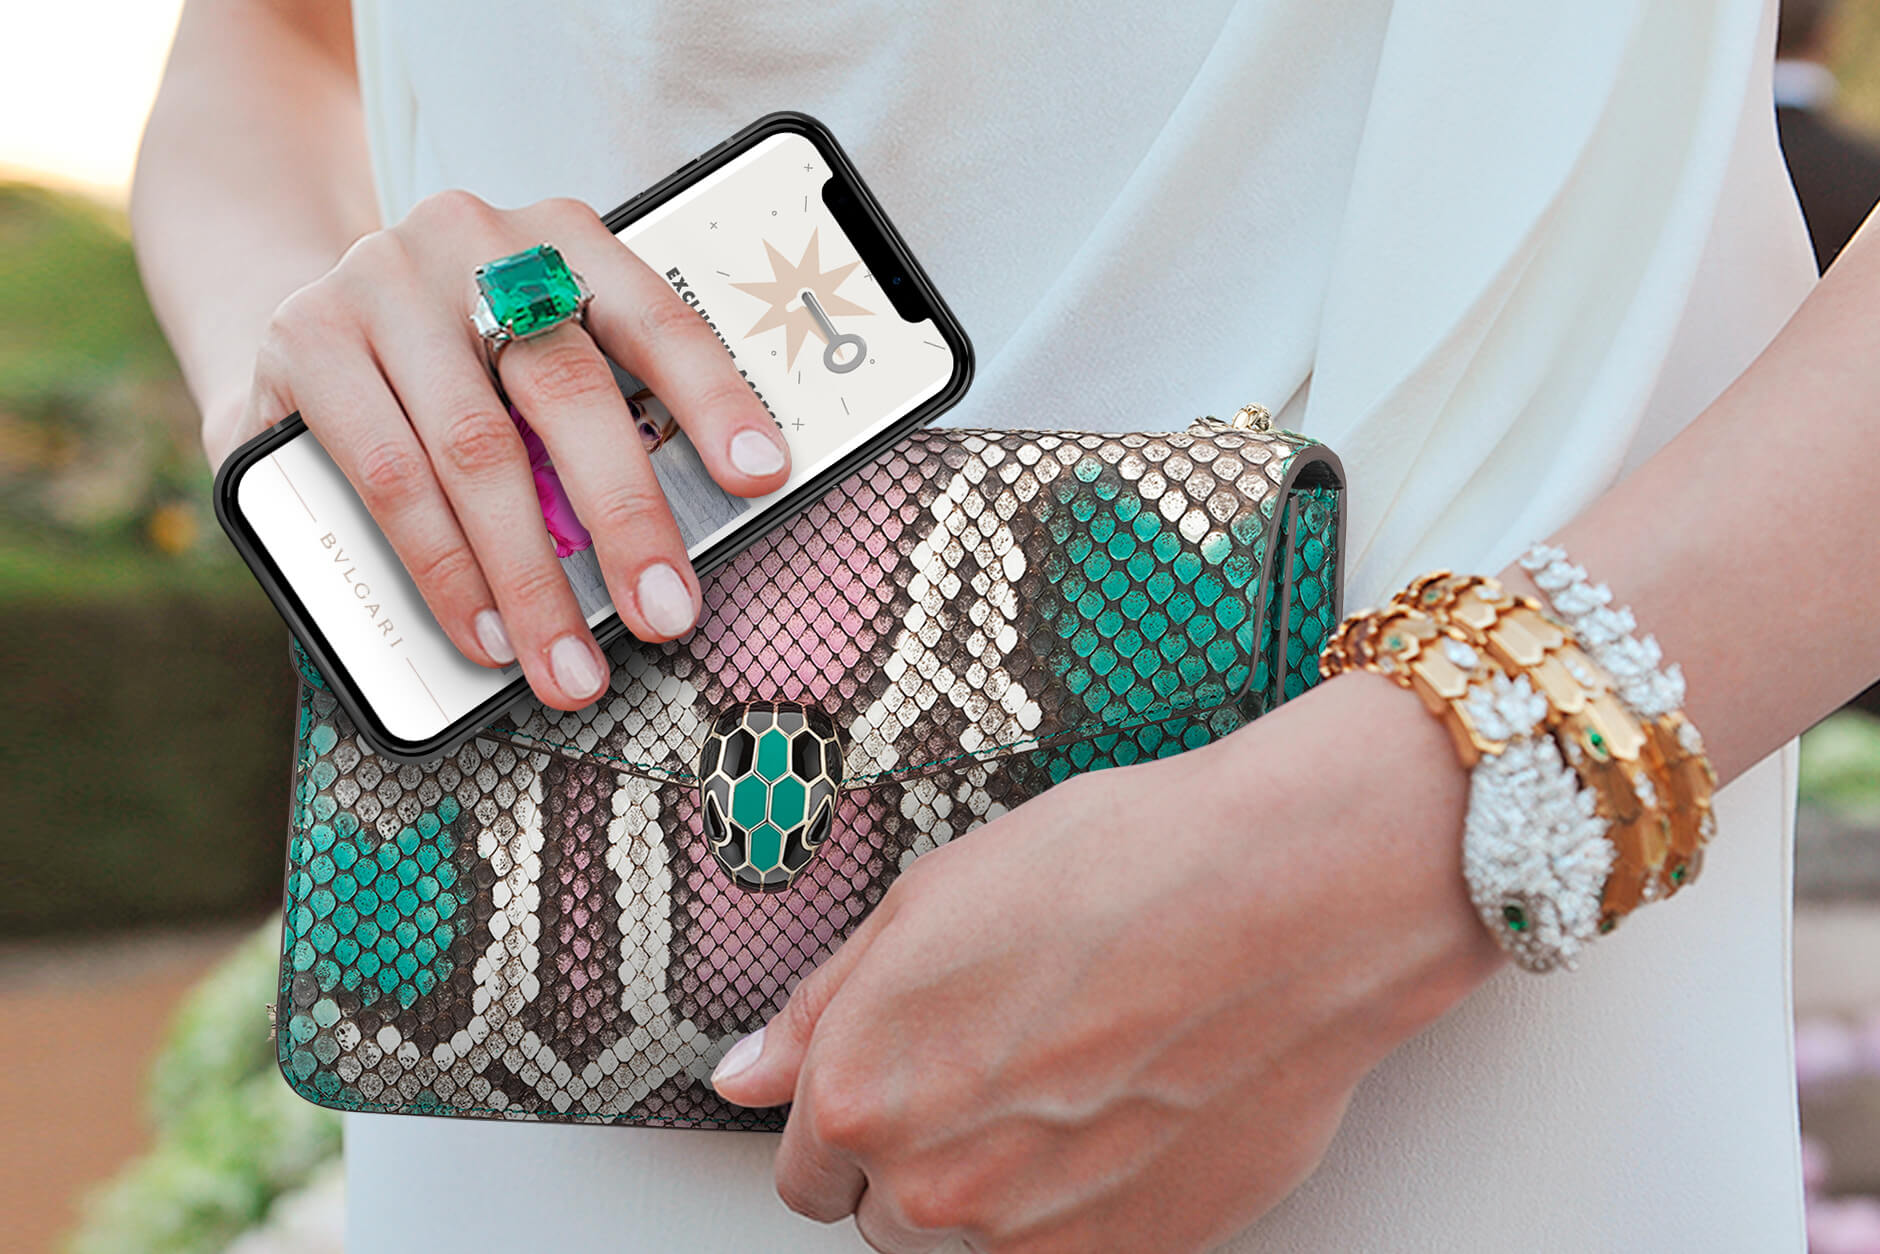 NFC for Luxury Brand: Fight Counterfeit and Market Effectively